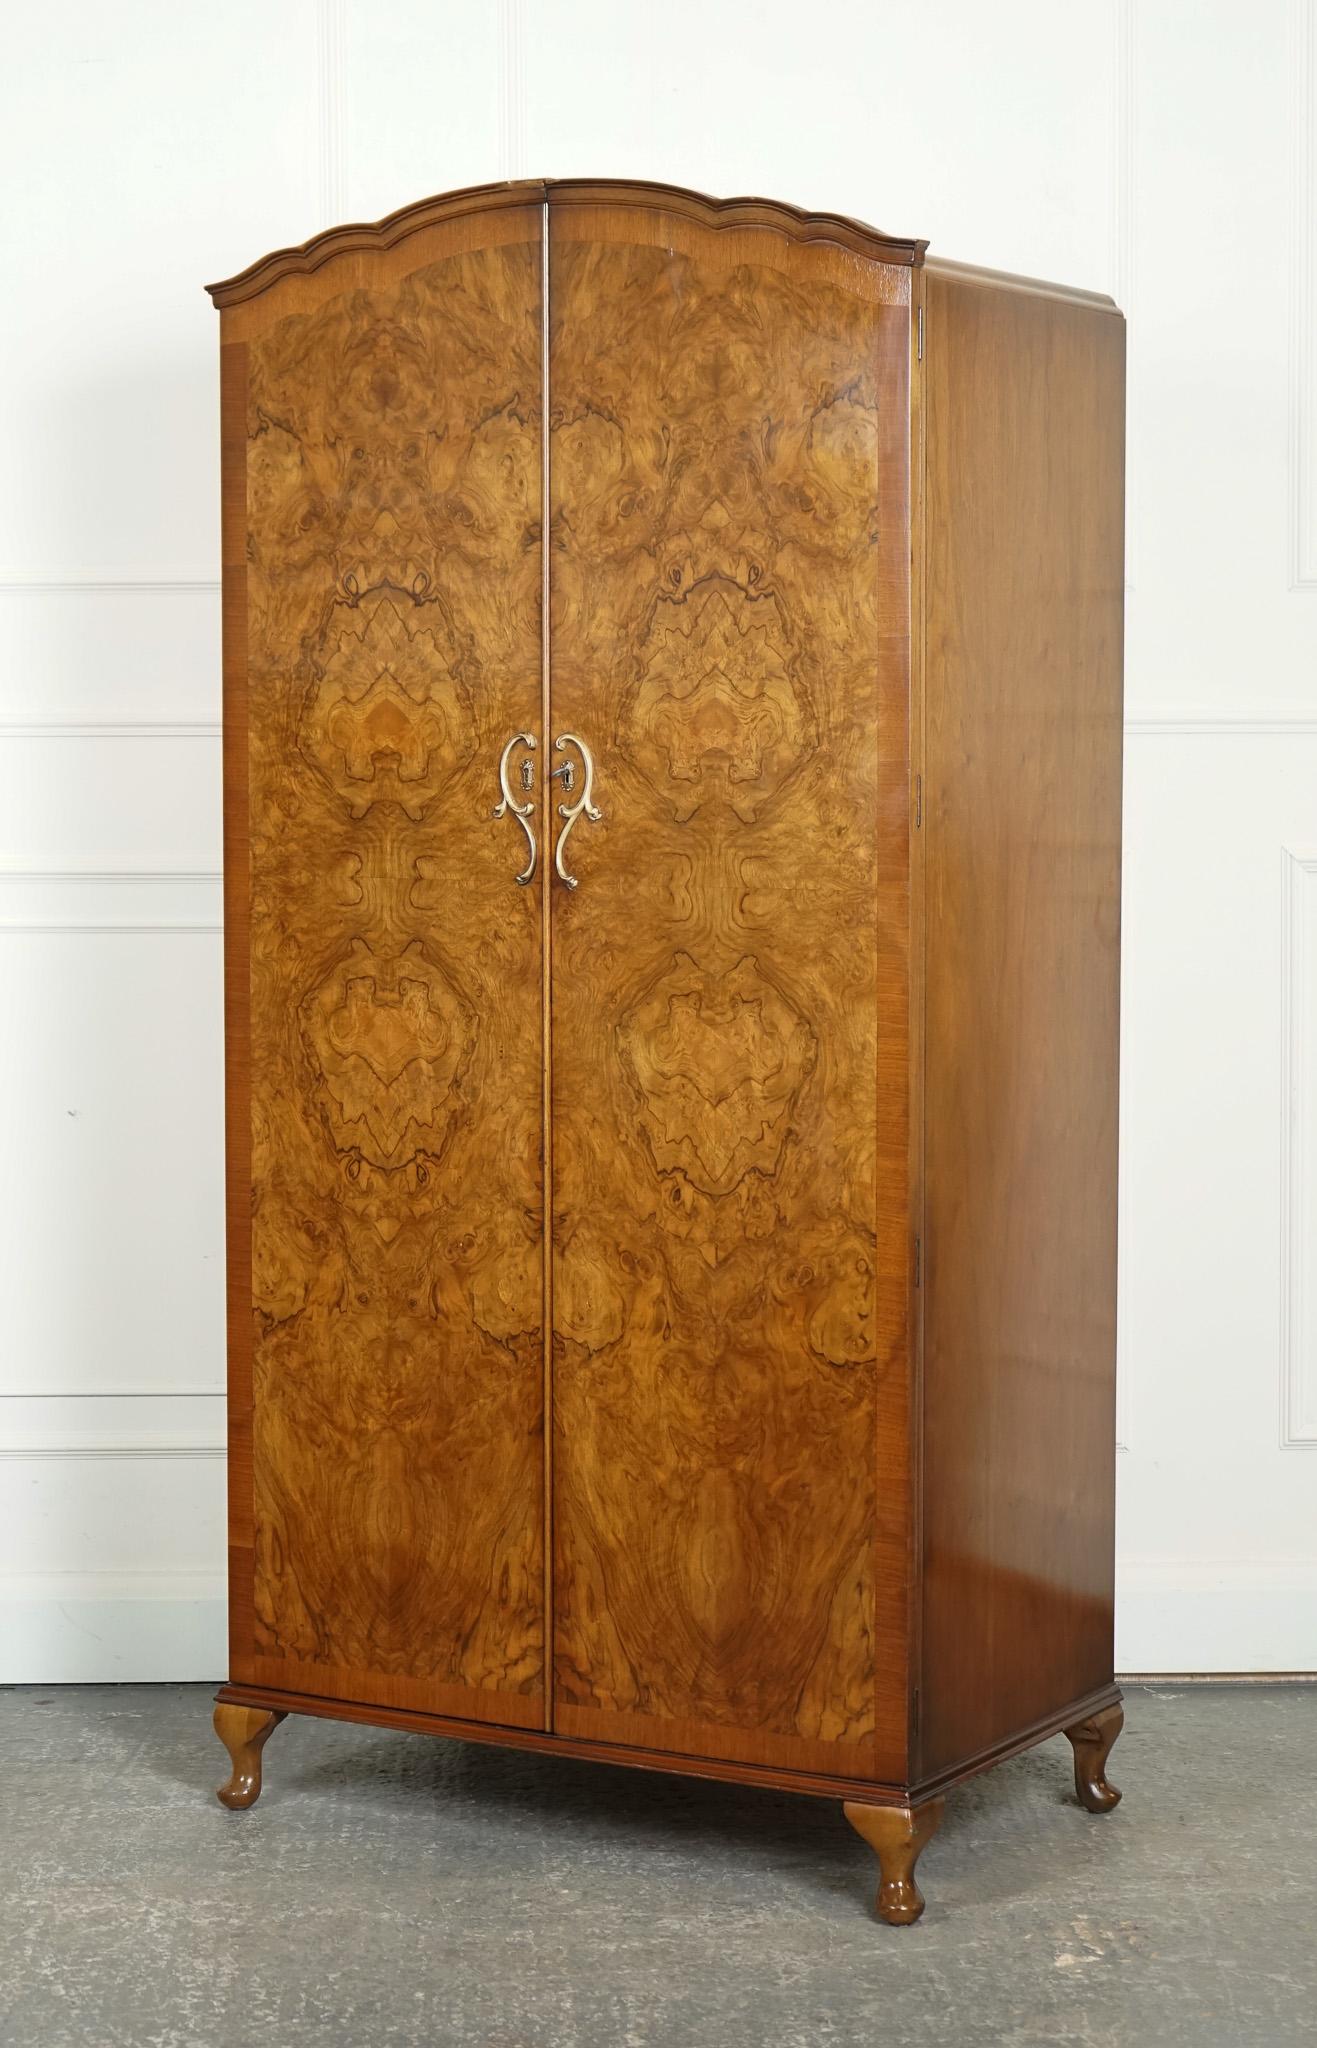 

We are delighted to offer for sale this Vintage Petite Art Deco 1940s Burr Walnut Wardrobe Made by Heirloom.

A stylish and elegant piece of furniture that captures the essence of the Art Deco design movement popular during the 1940s. This